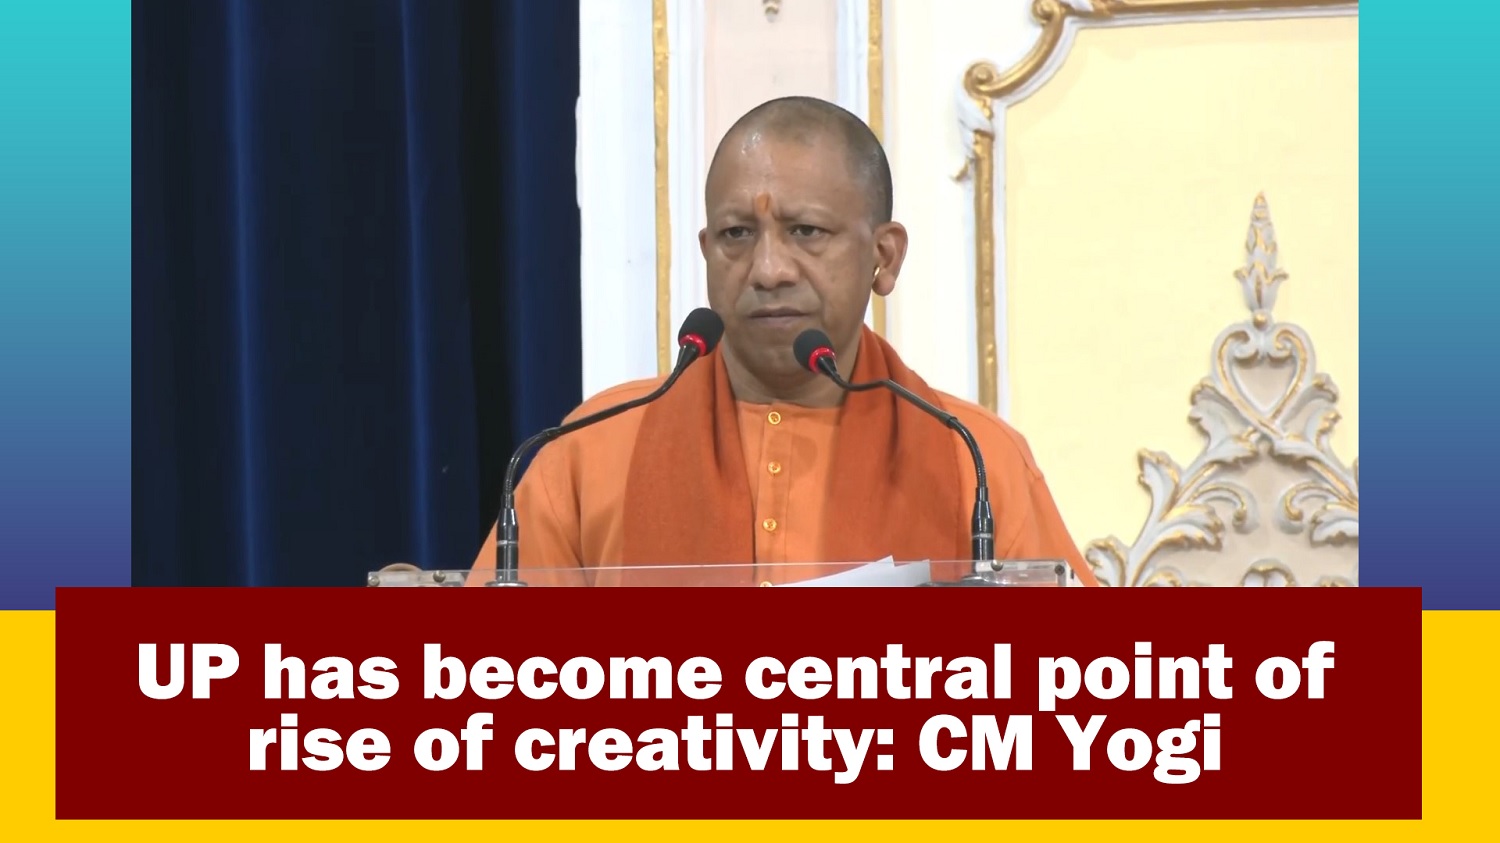 UP has become central point of rise of creativity: CM Yogi Adityanath